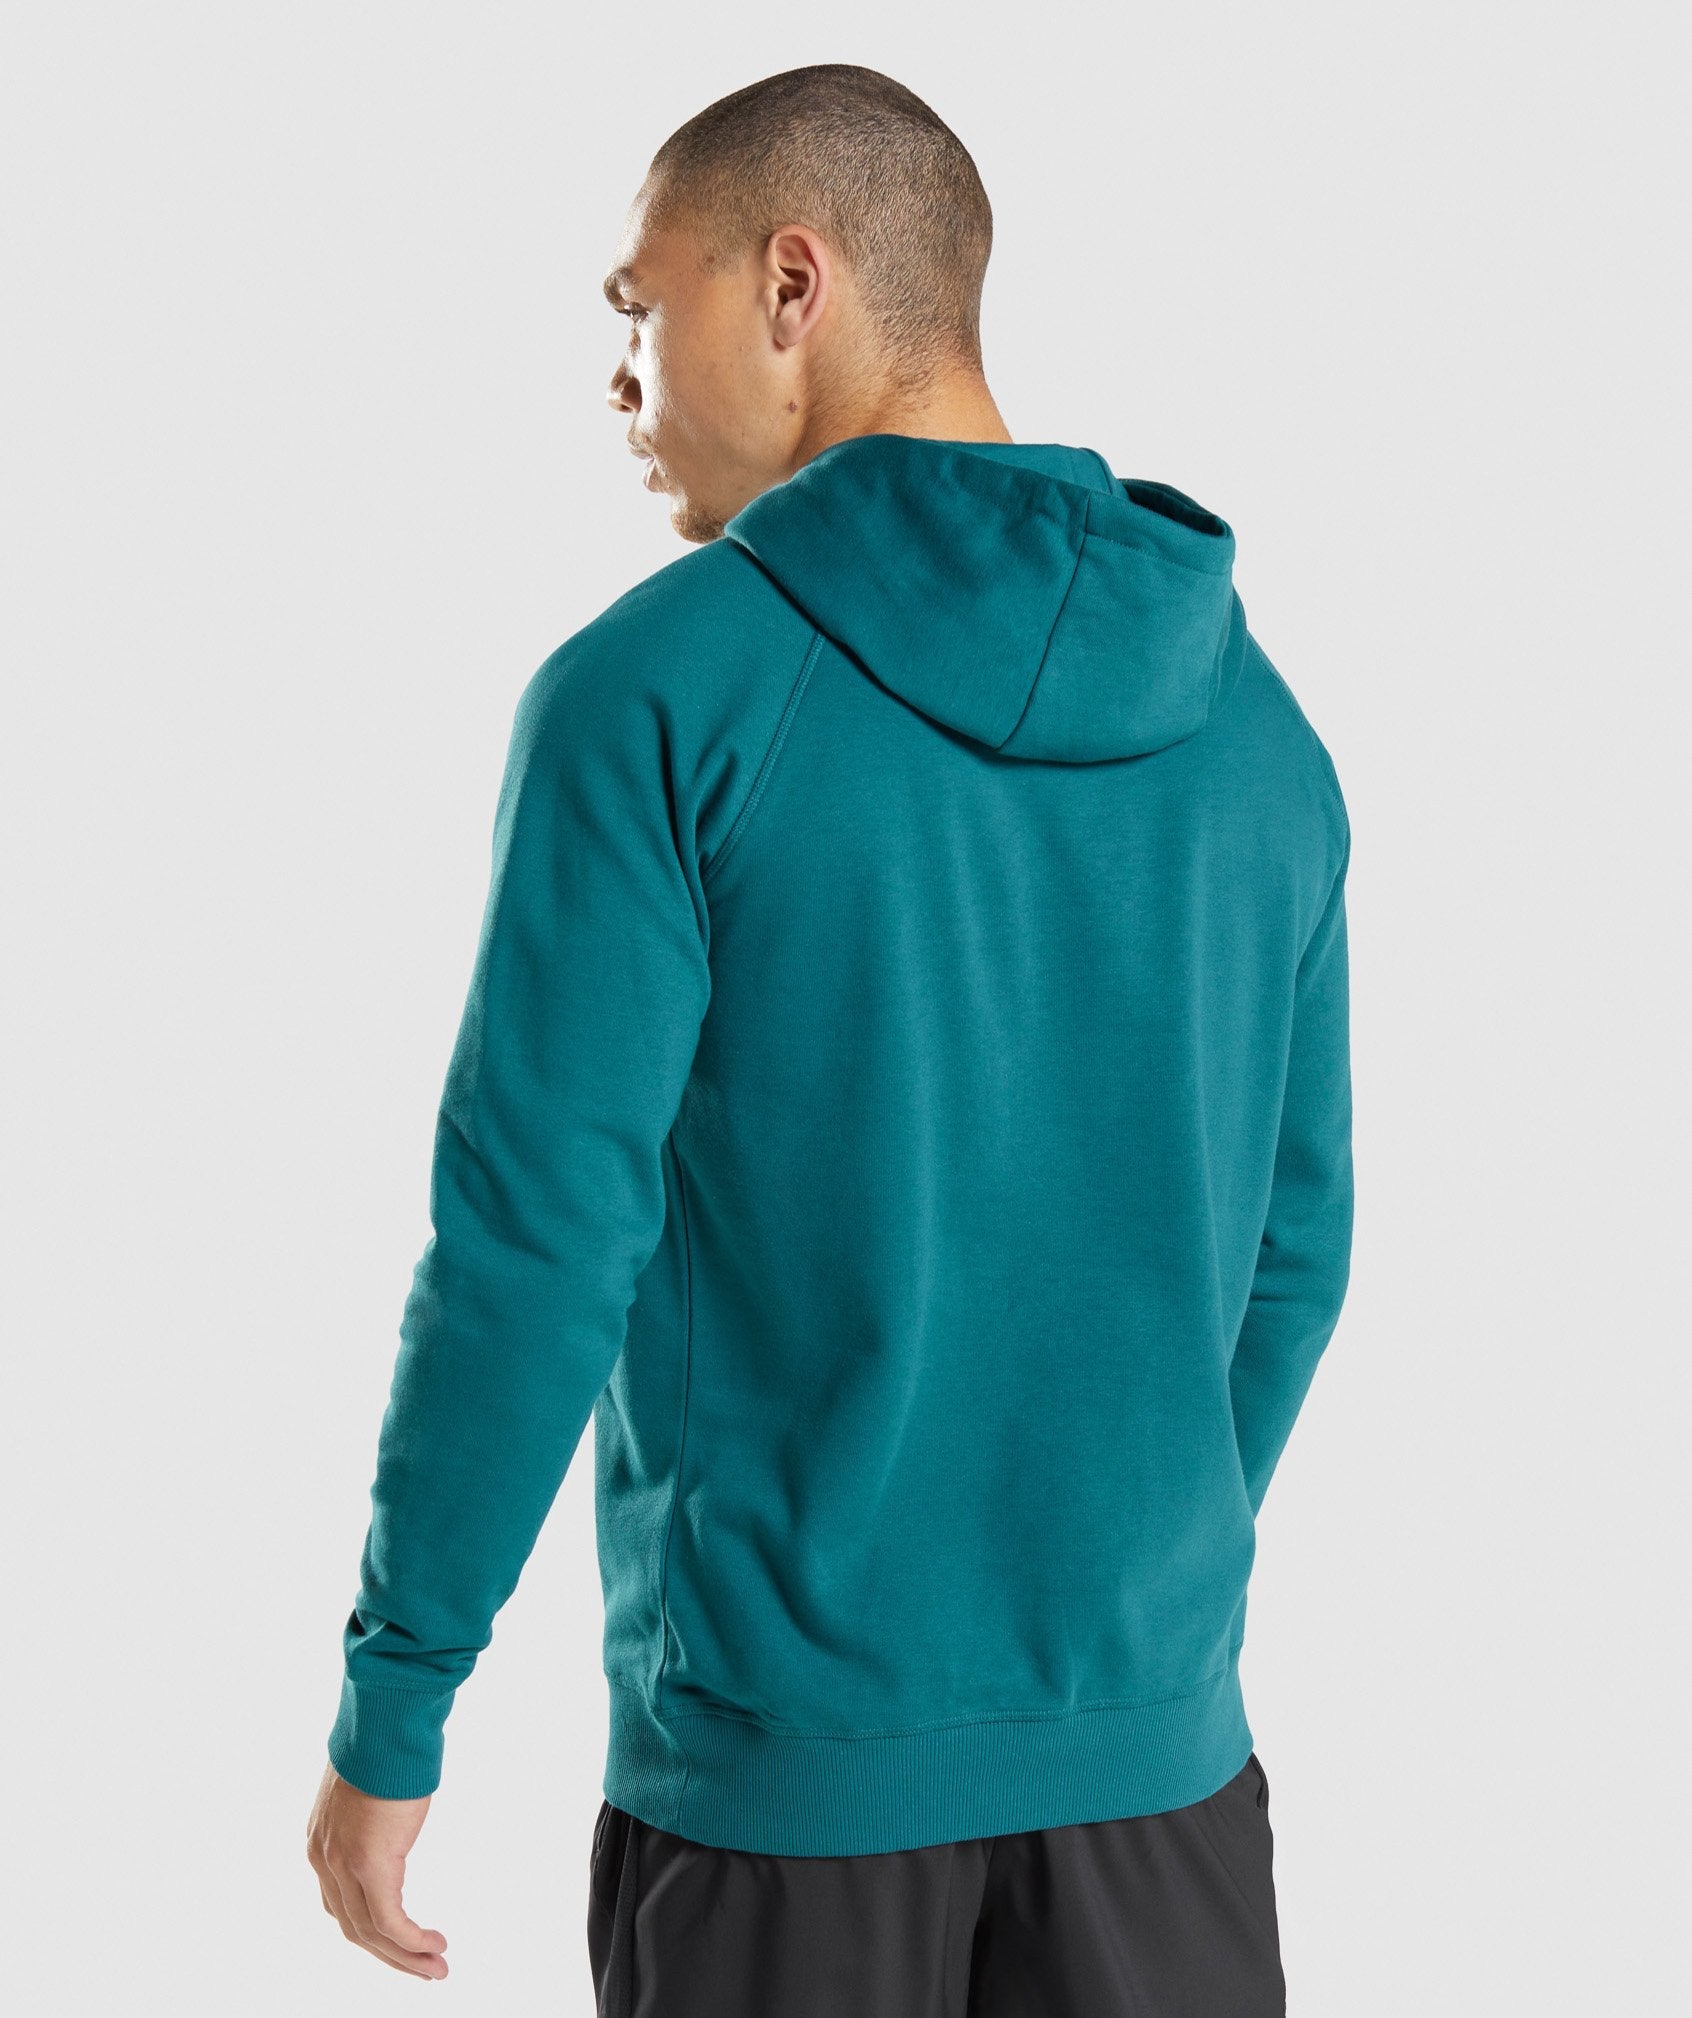 Sharkhead Infill Hoodie in Teal - view 2